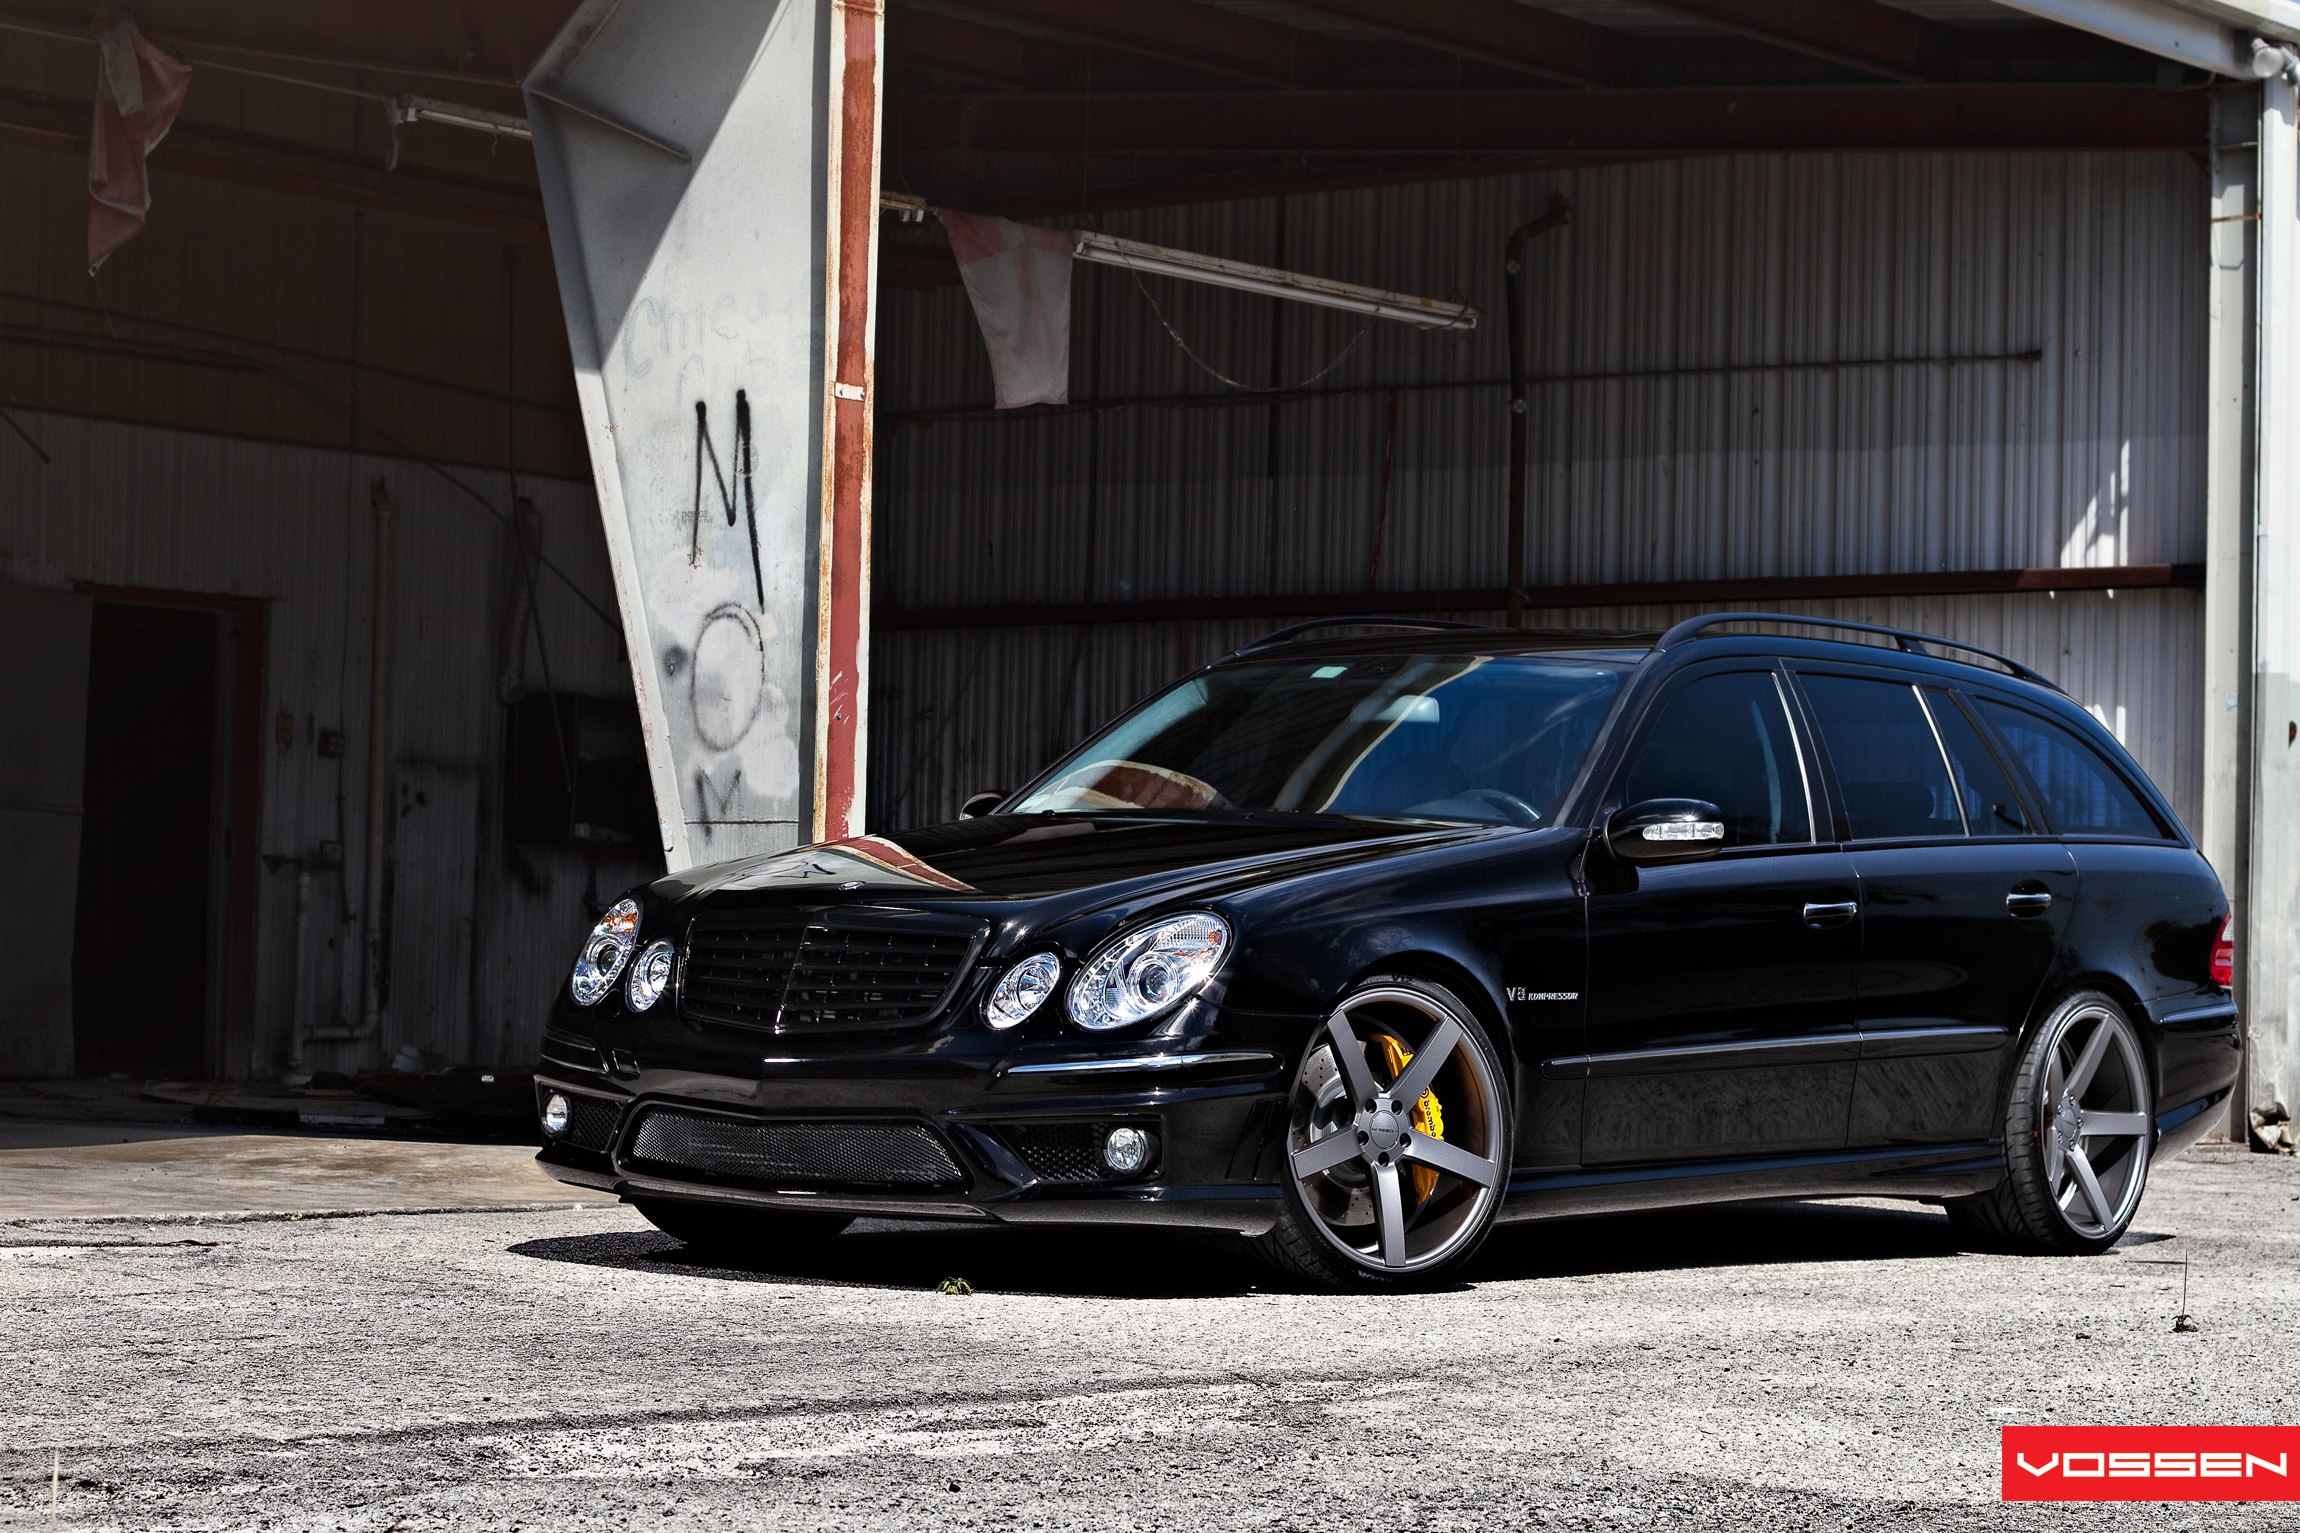 Black Mercedes E Class with Roof Rack System - Photo by Vossen